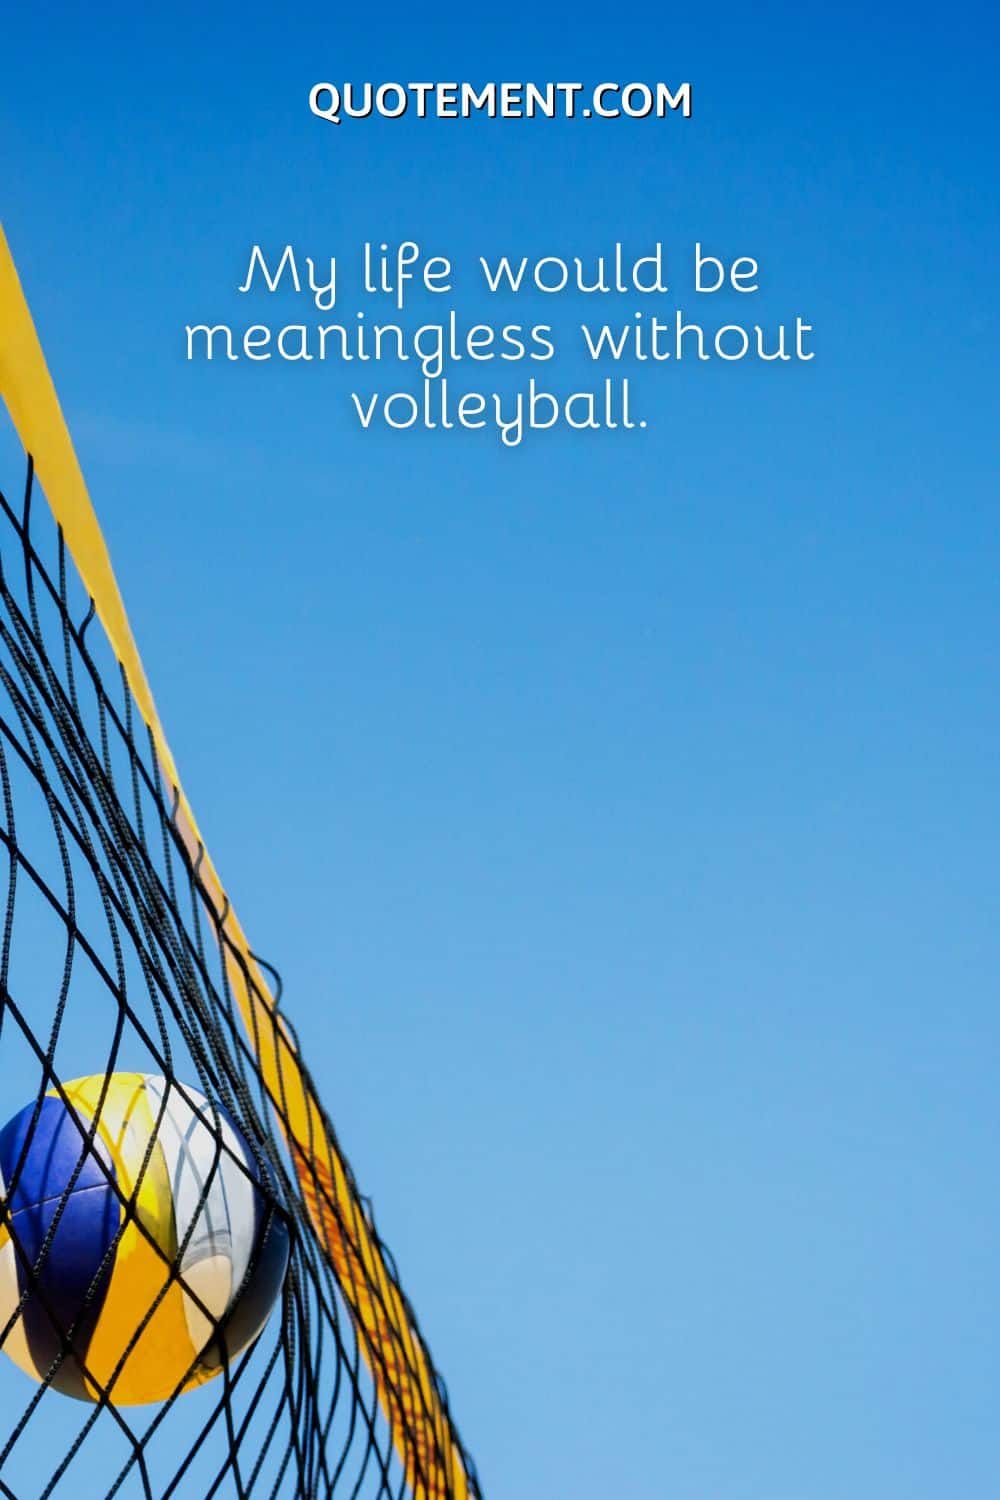 My life would be meaningless without volleyball.